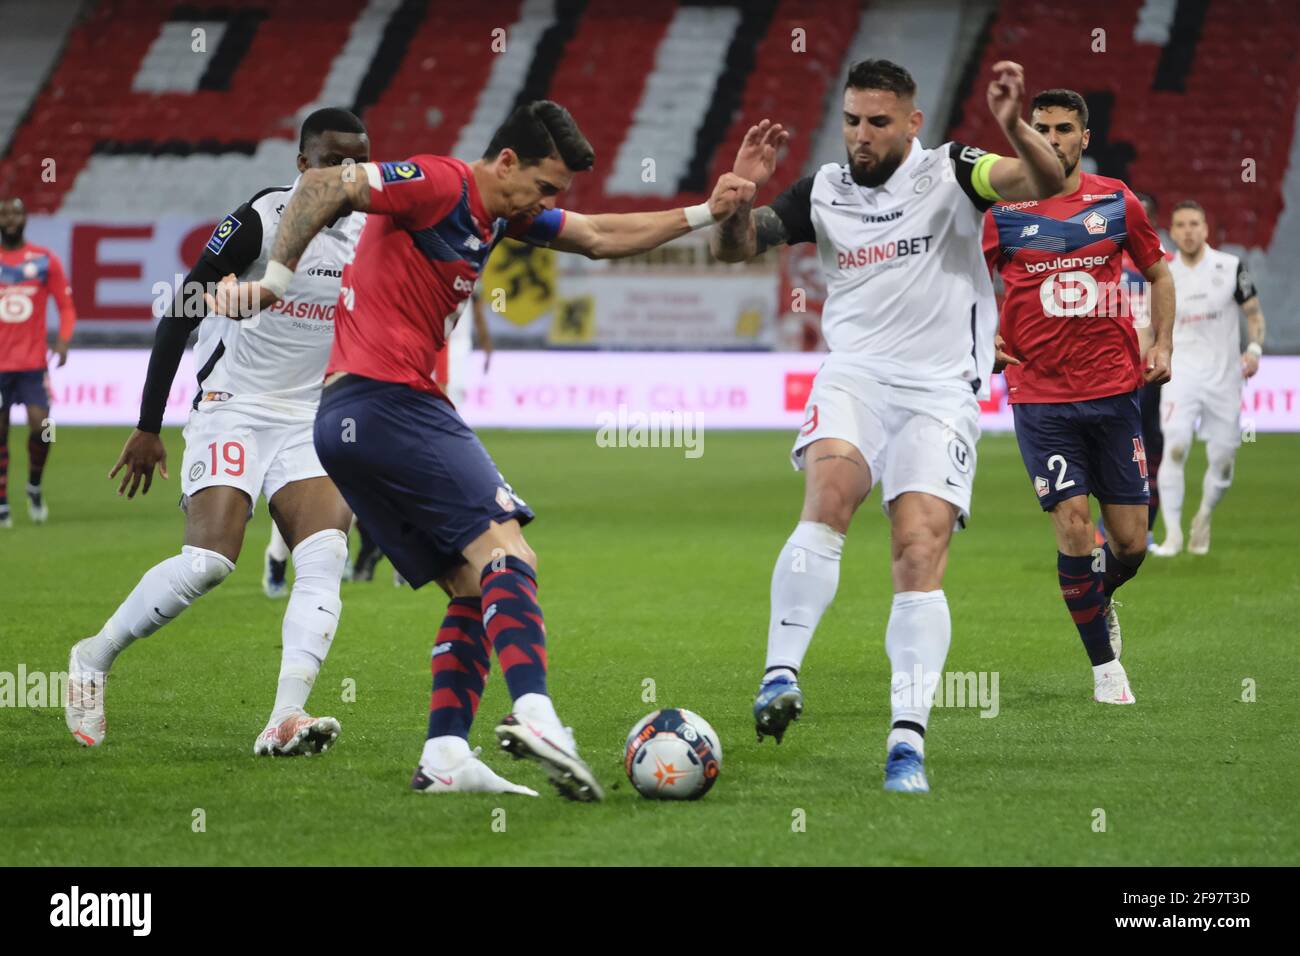 Villeneuve d'Ascq, Nord, France. 16th Apr, 2021. Defender of Lille JOSE MIGUEL DA ROCHA FONTE in action during the French championship soccer Ligue 1 Uber Eats Lille against Montpellier at Pierre Mauroy Stadium - Villeneuve d'Ascq.Lille Montpellier 1:1 Credit: Pierre Stevenin/ZUMA Wire/Alamy Live News Stock Photo